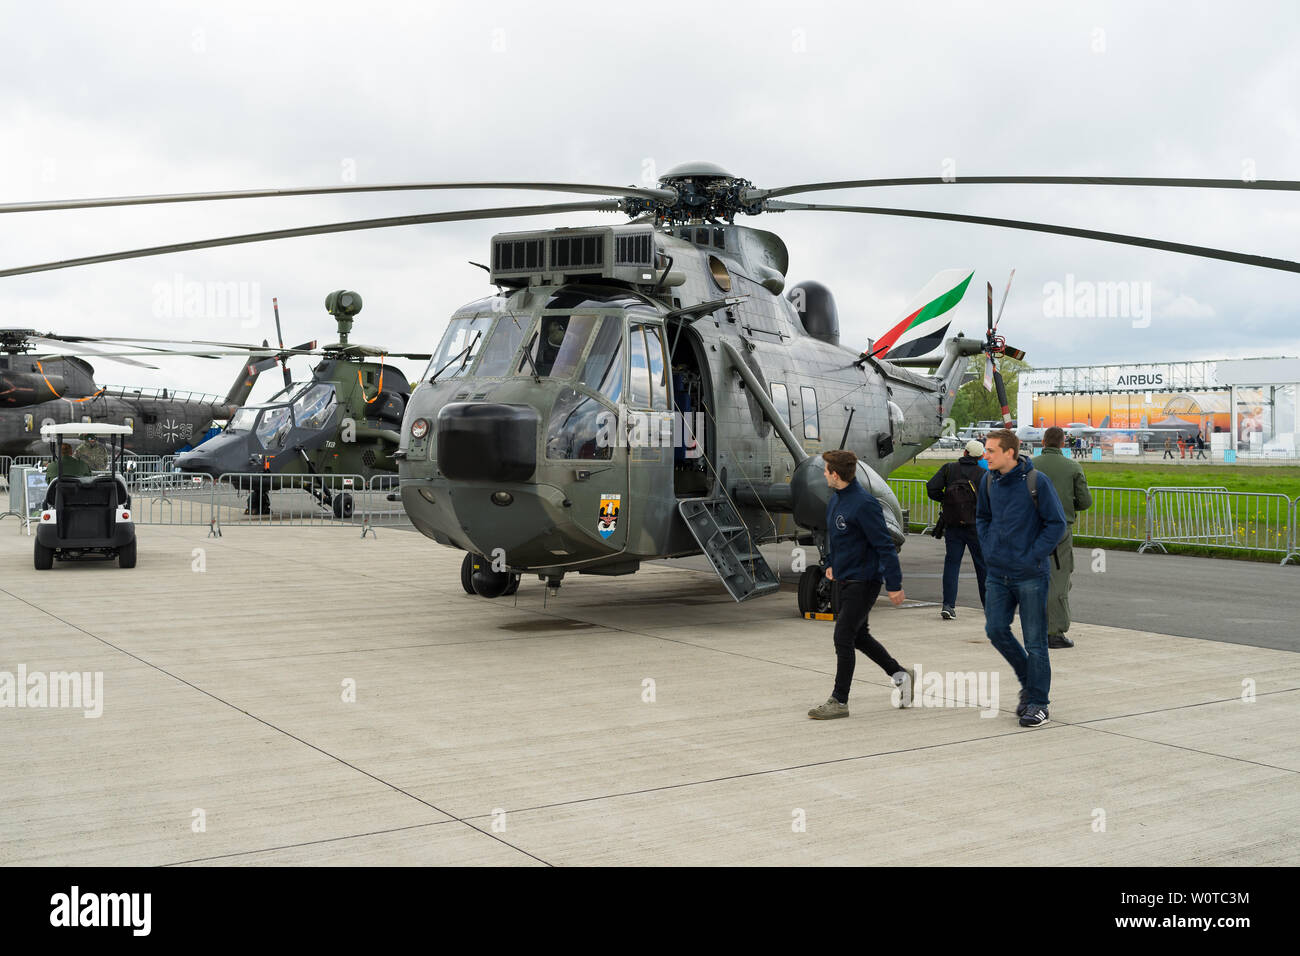 BERLIN, GERMANY - APRIL 26, 2018: Anti-submarine warfare, search and rescue and utility helicopter Sikorsky SH-3 Sea King. German Navy. Exhibition ILA Berlin Air Show 2018. Stock Photo